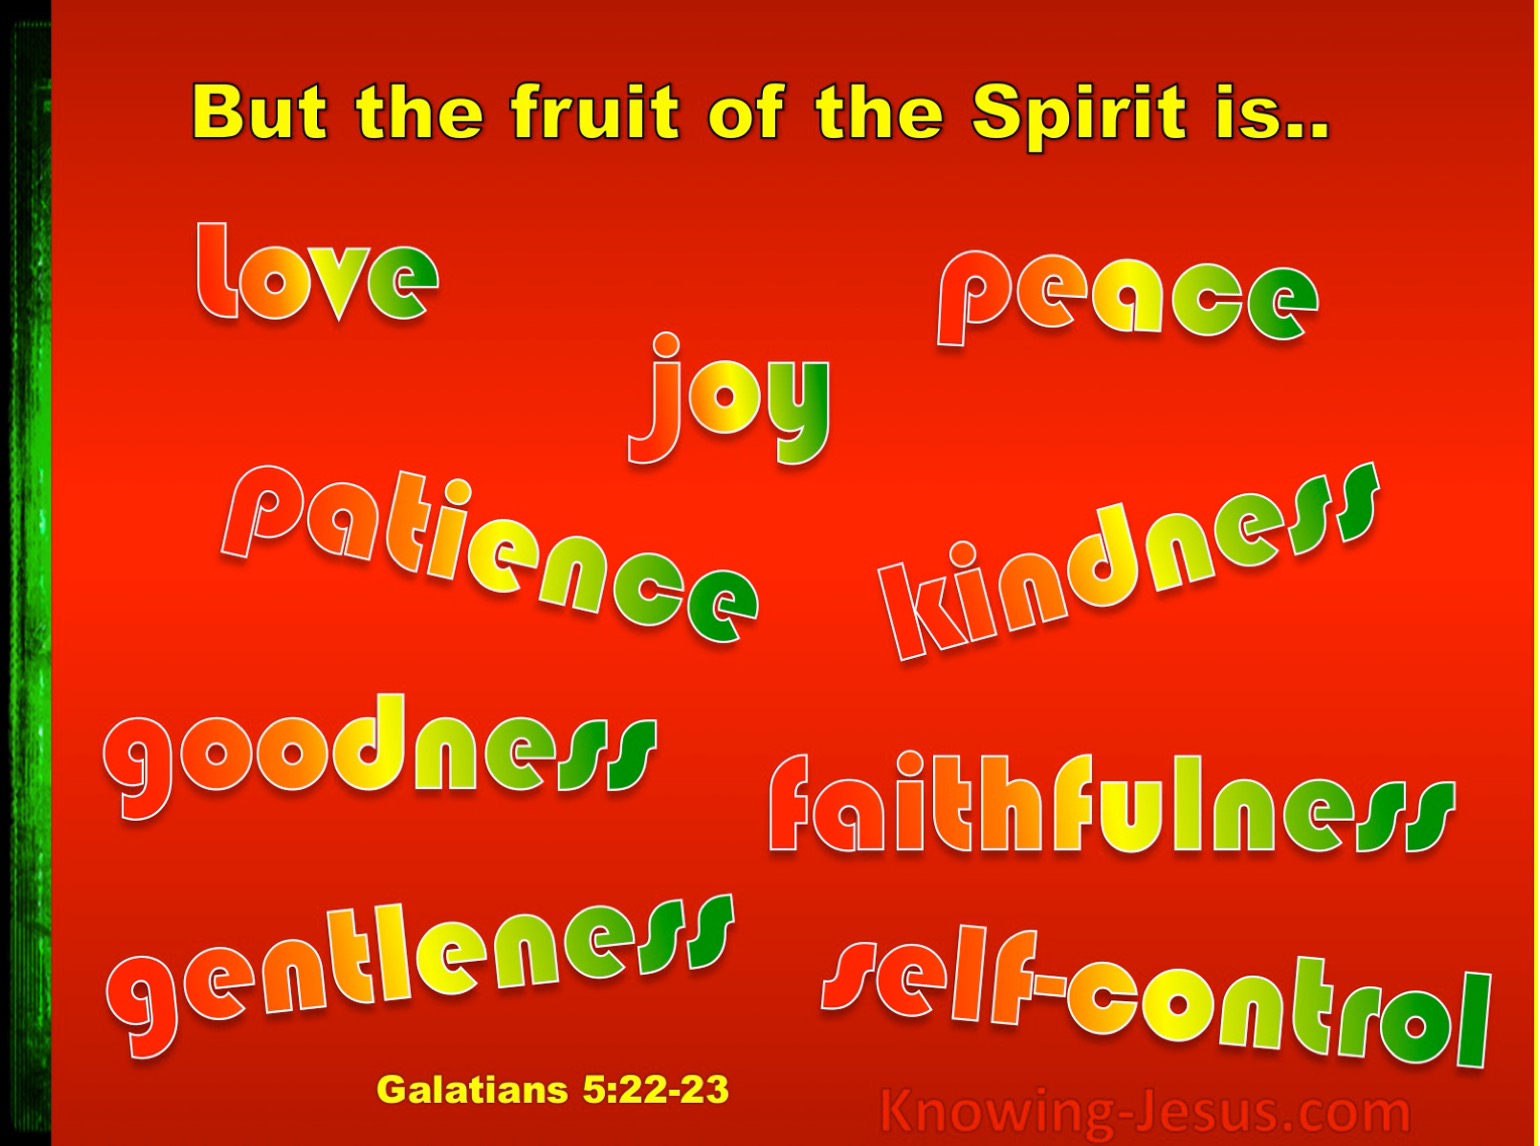 What are the Fruit of the Spirit? Bible Meaning Explained